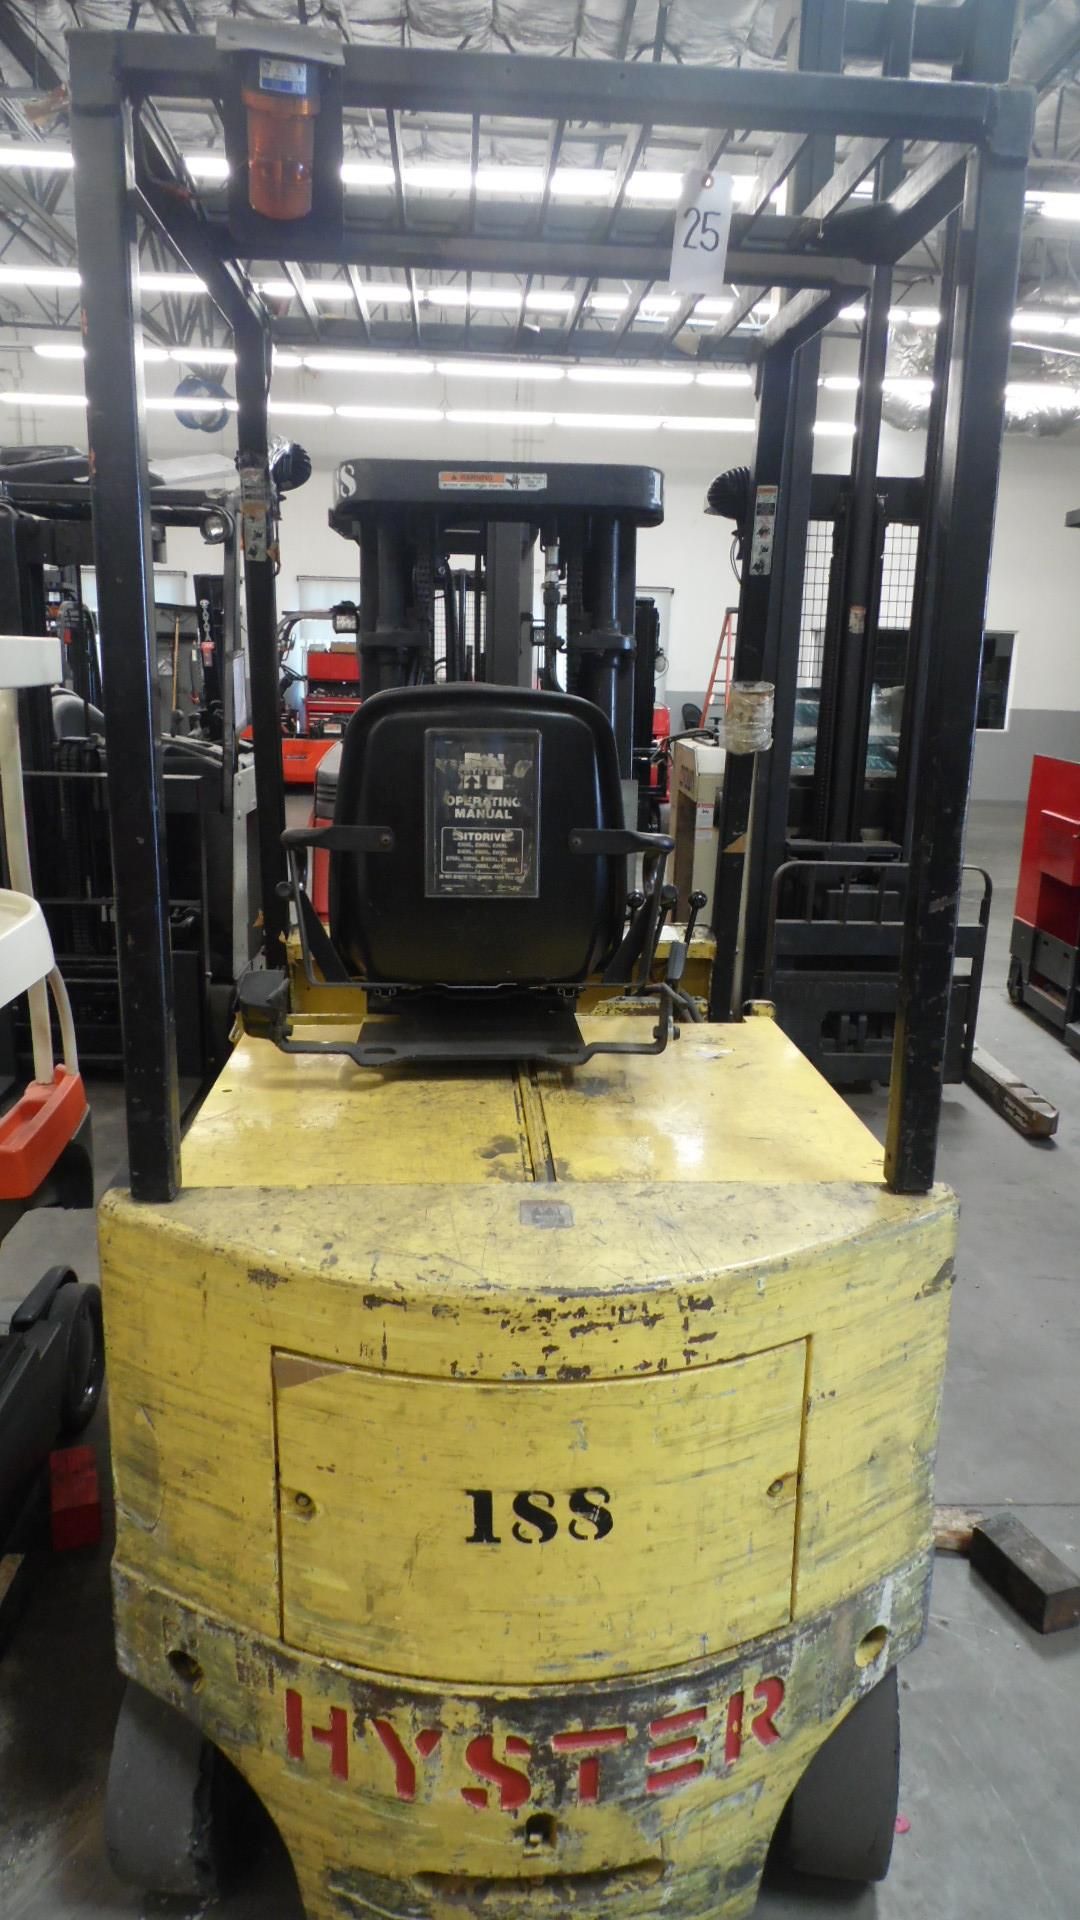 #21349 HYSTER E50XL-33 SIT-DOWN ELECTRIC CUSHION 5000-LB. ( MAST HGT. 87" / 189") - Image 2 of 2